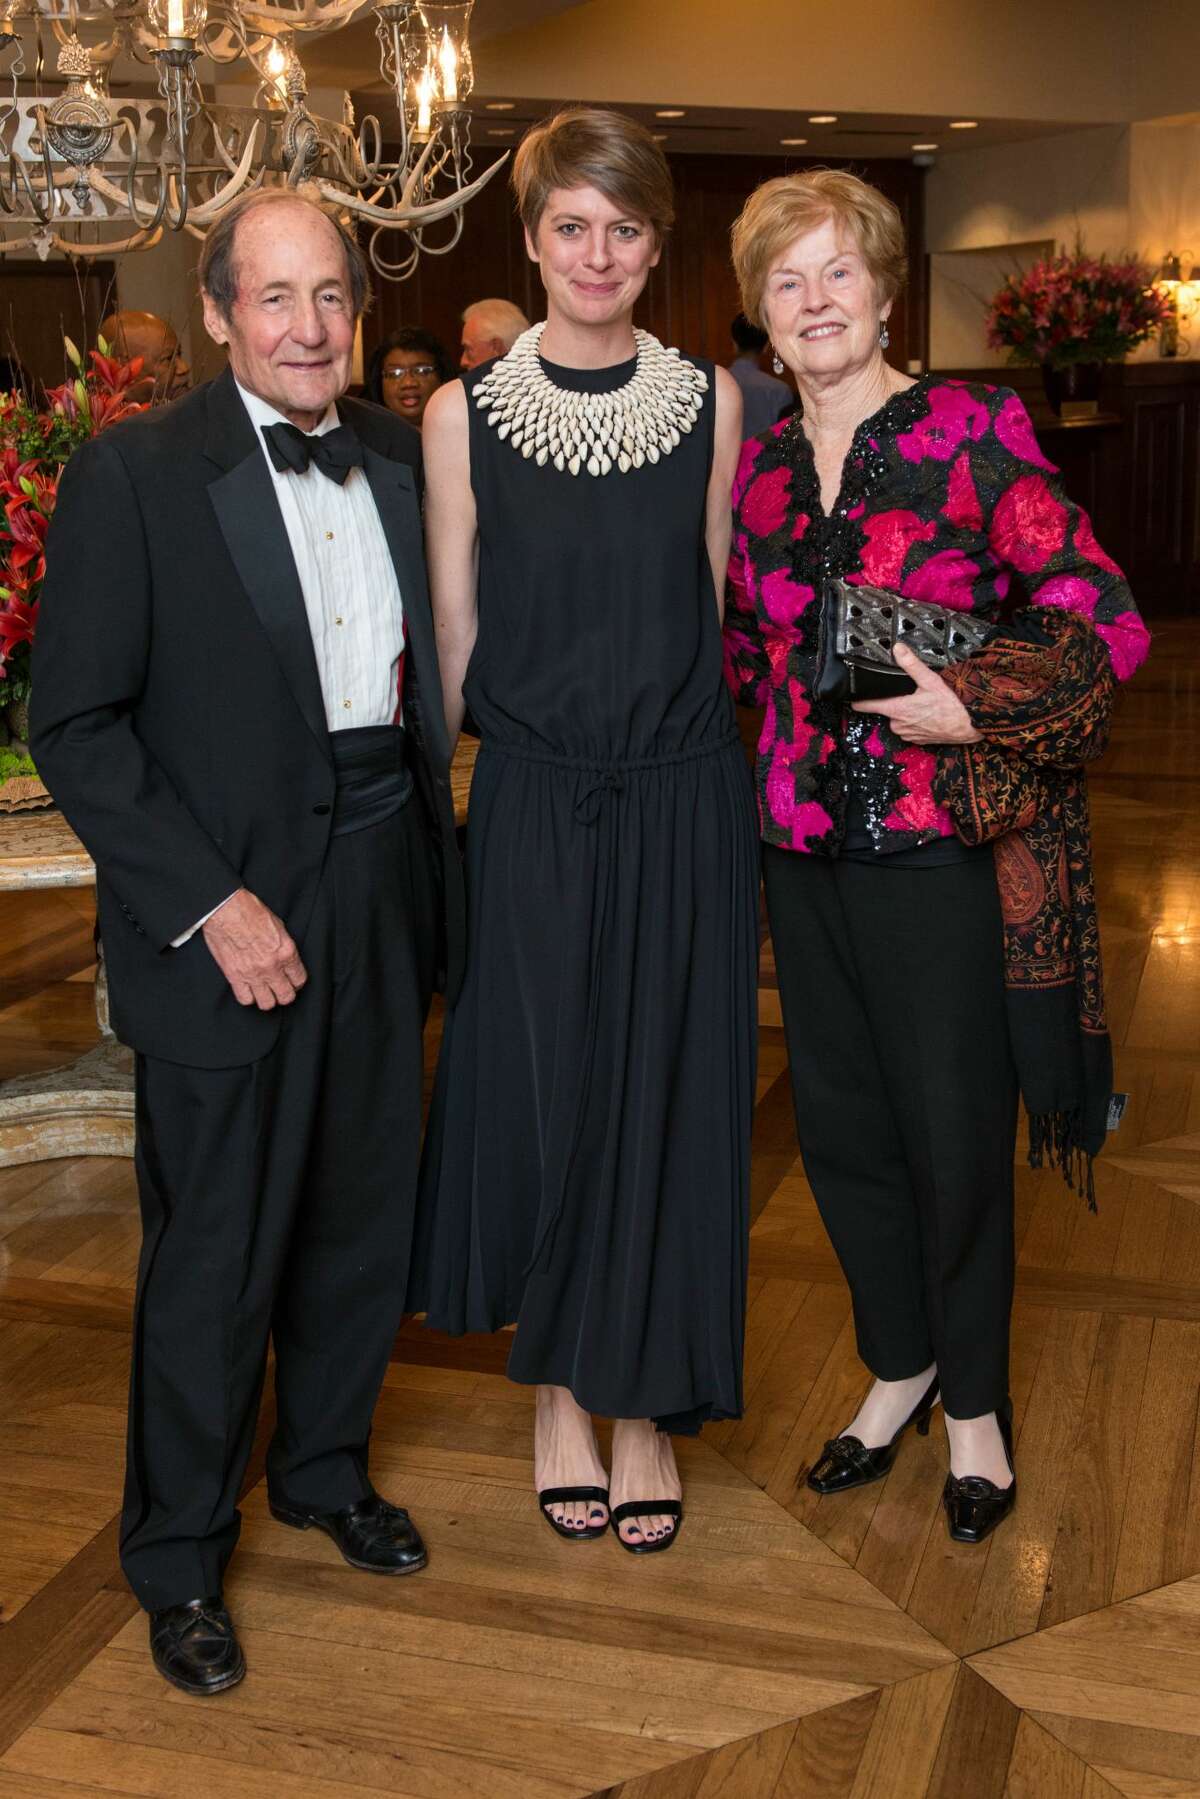 2018 Inprint Poets & Writers Ball at The Houstonian Hotel. Jeff and Kristina Fort, Lois Zamora